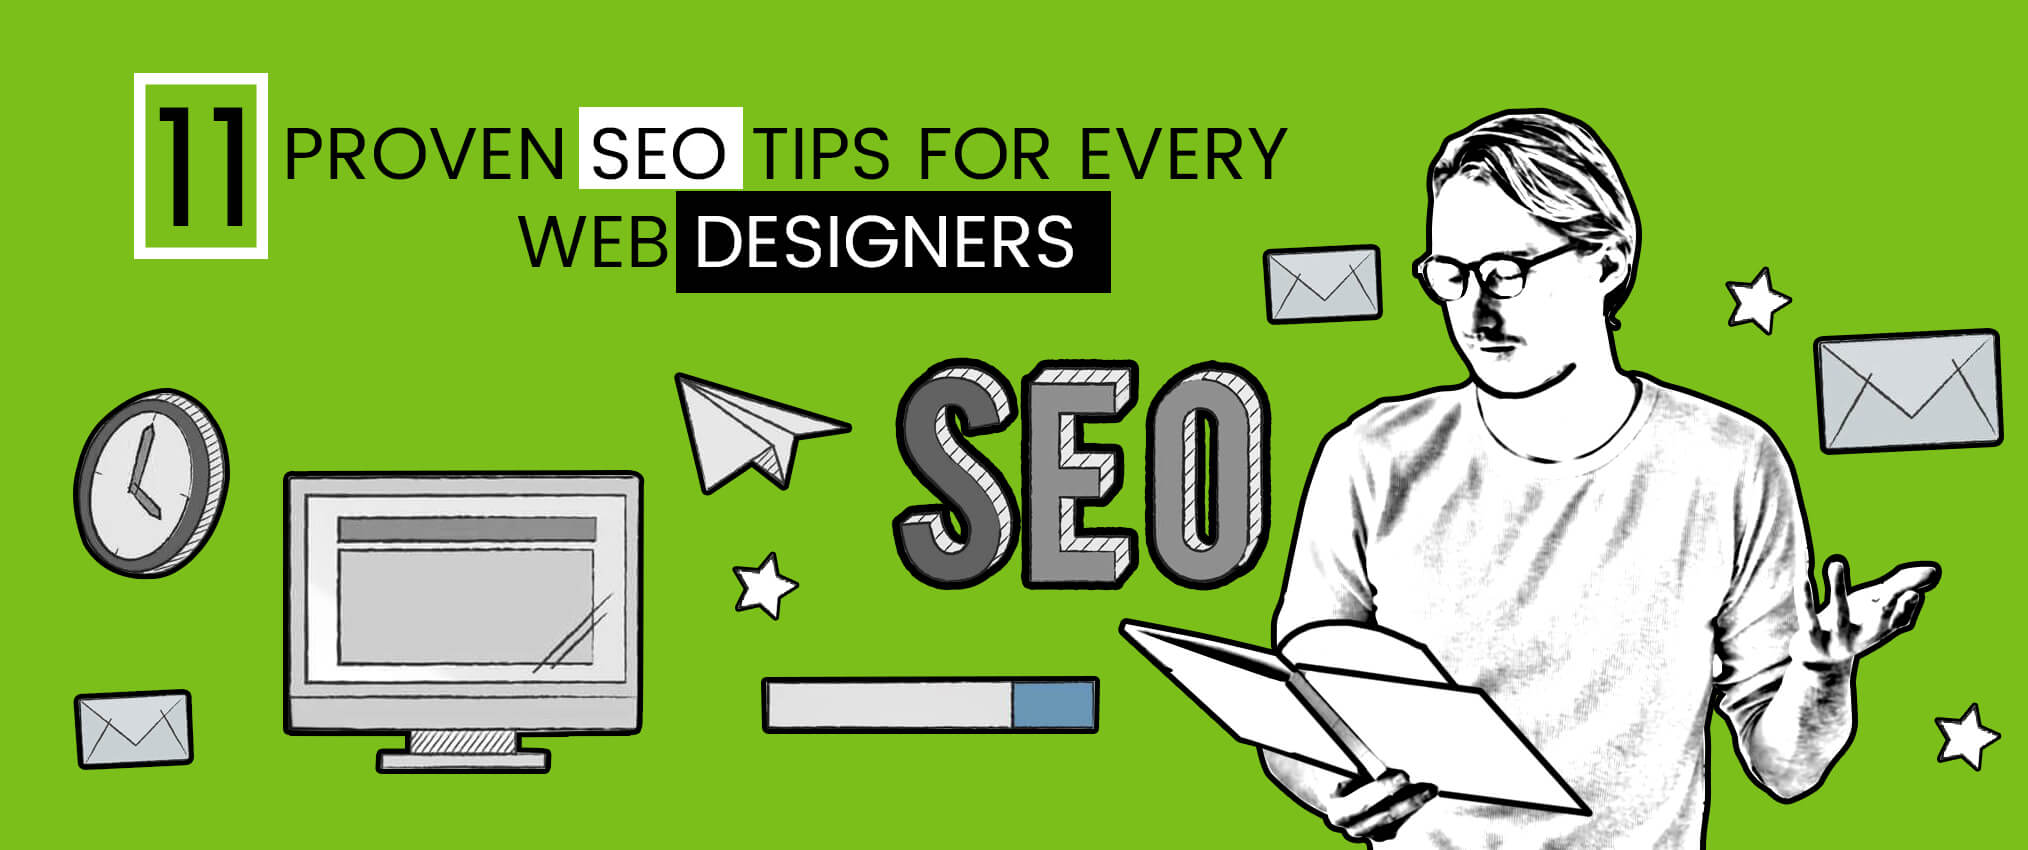 SEO Tips for Web Designers